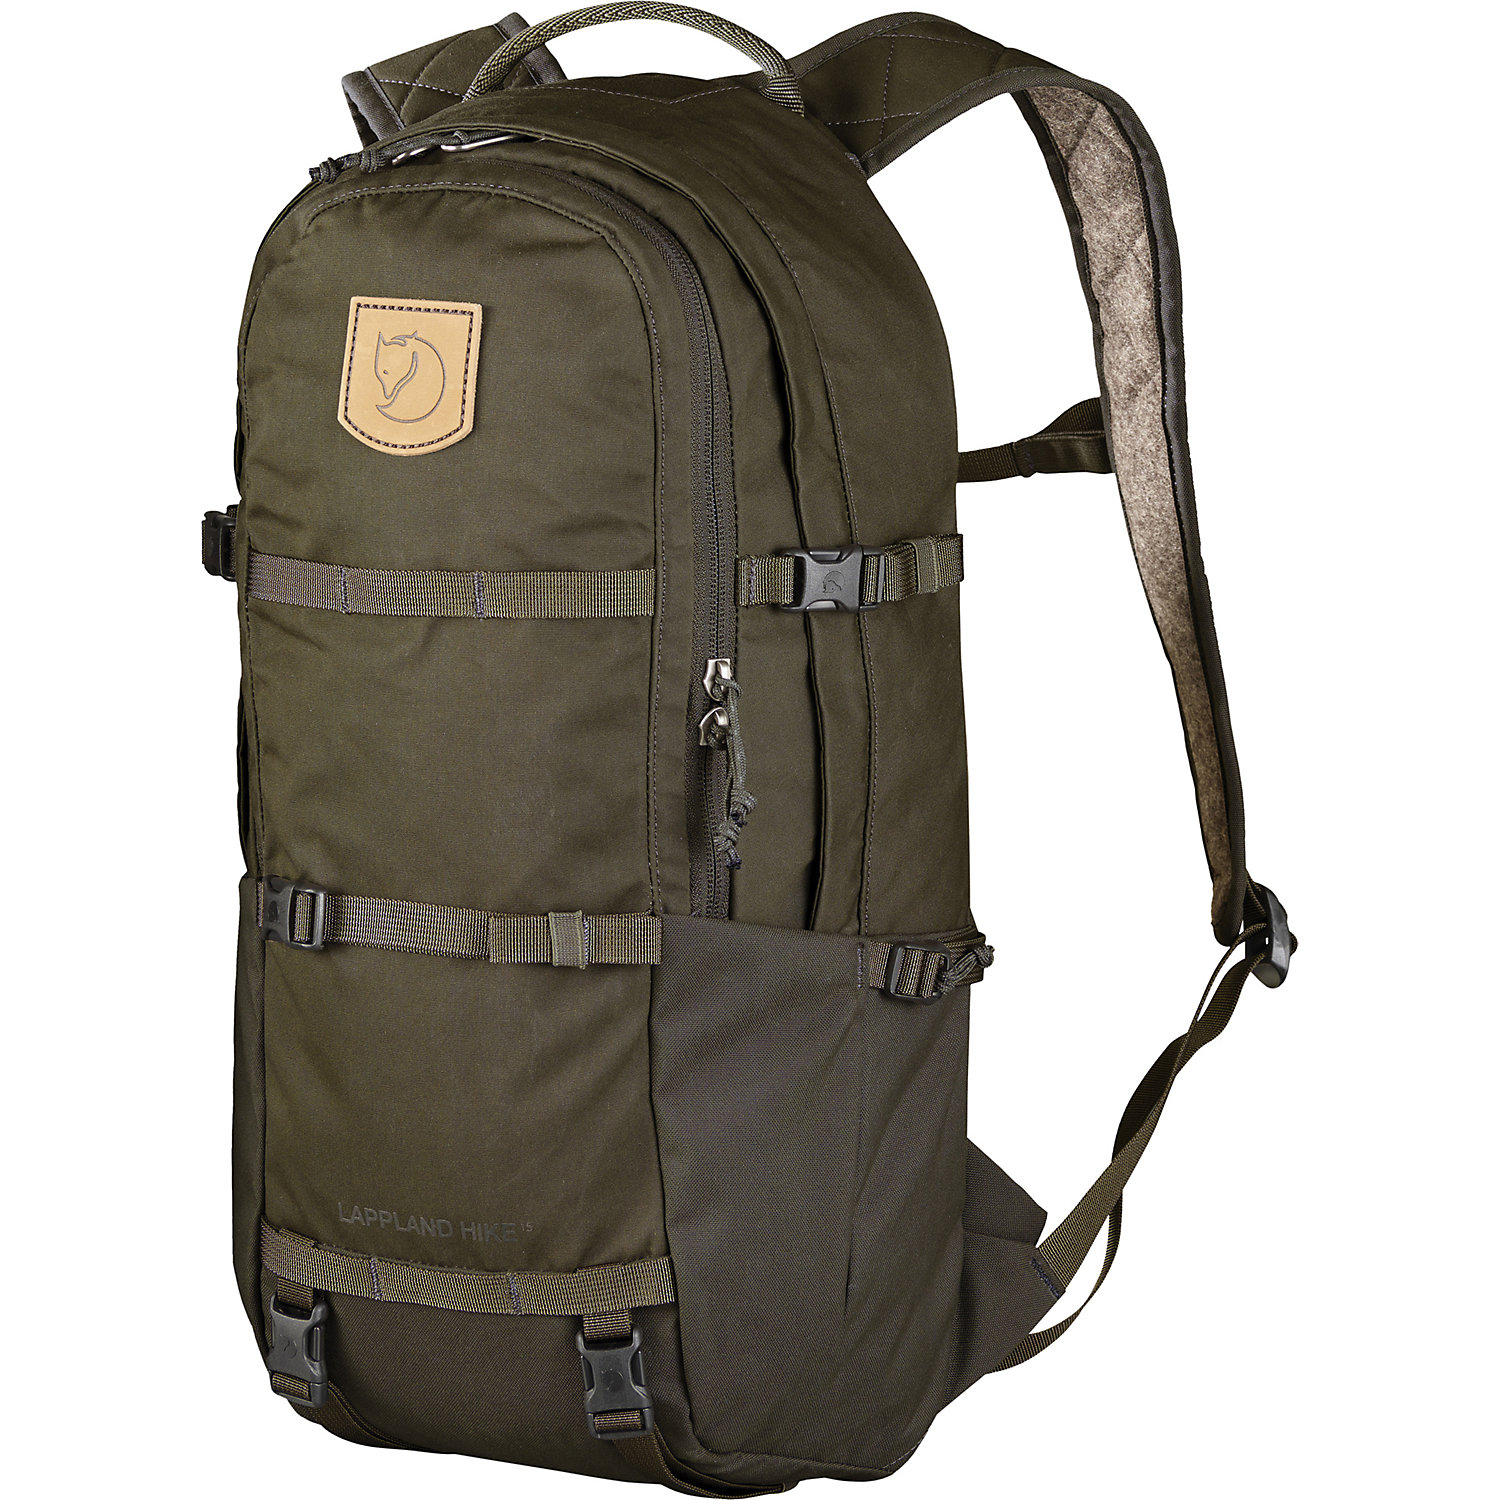 above Specialist Contagious Fjallraven Lappland Hike 15 Pack - Moosejaw